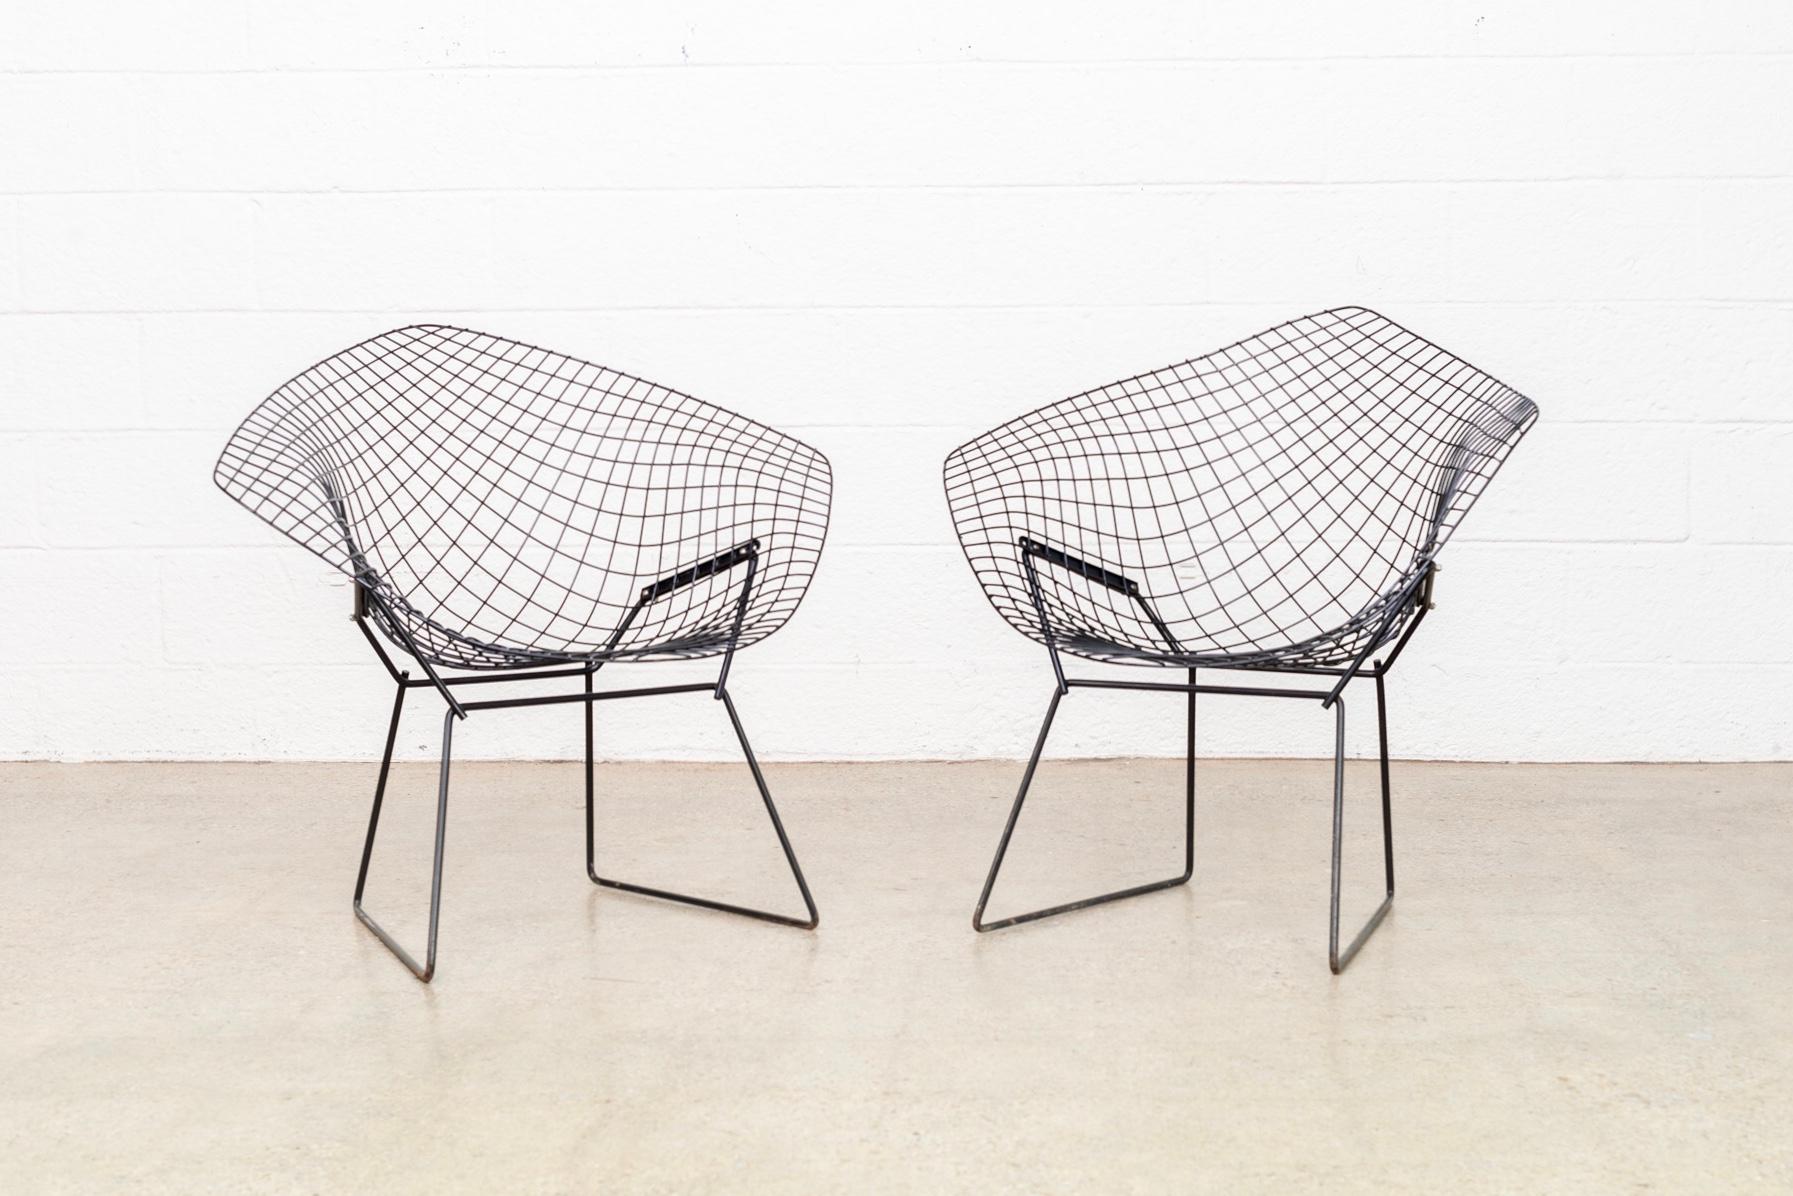 The diamond wire chair was designed by Harry Bertoia for Knoll in 1952. This pair of chairs features welded steel rod construction with a black finish. The sculptural form of this iconic chair make it a fixture of Mid-Century Modern